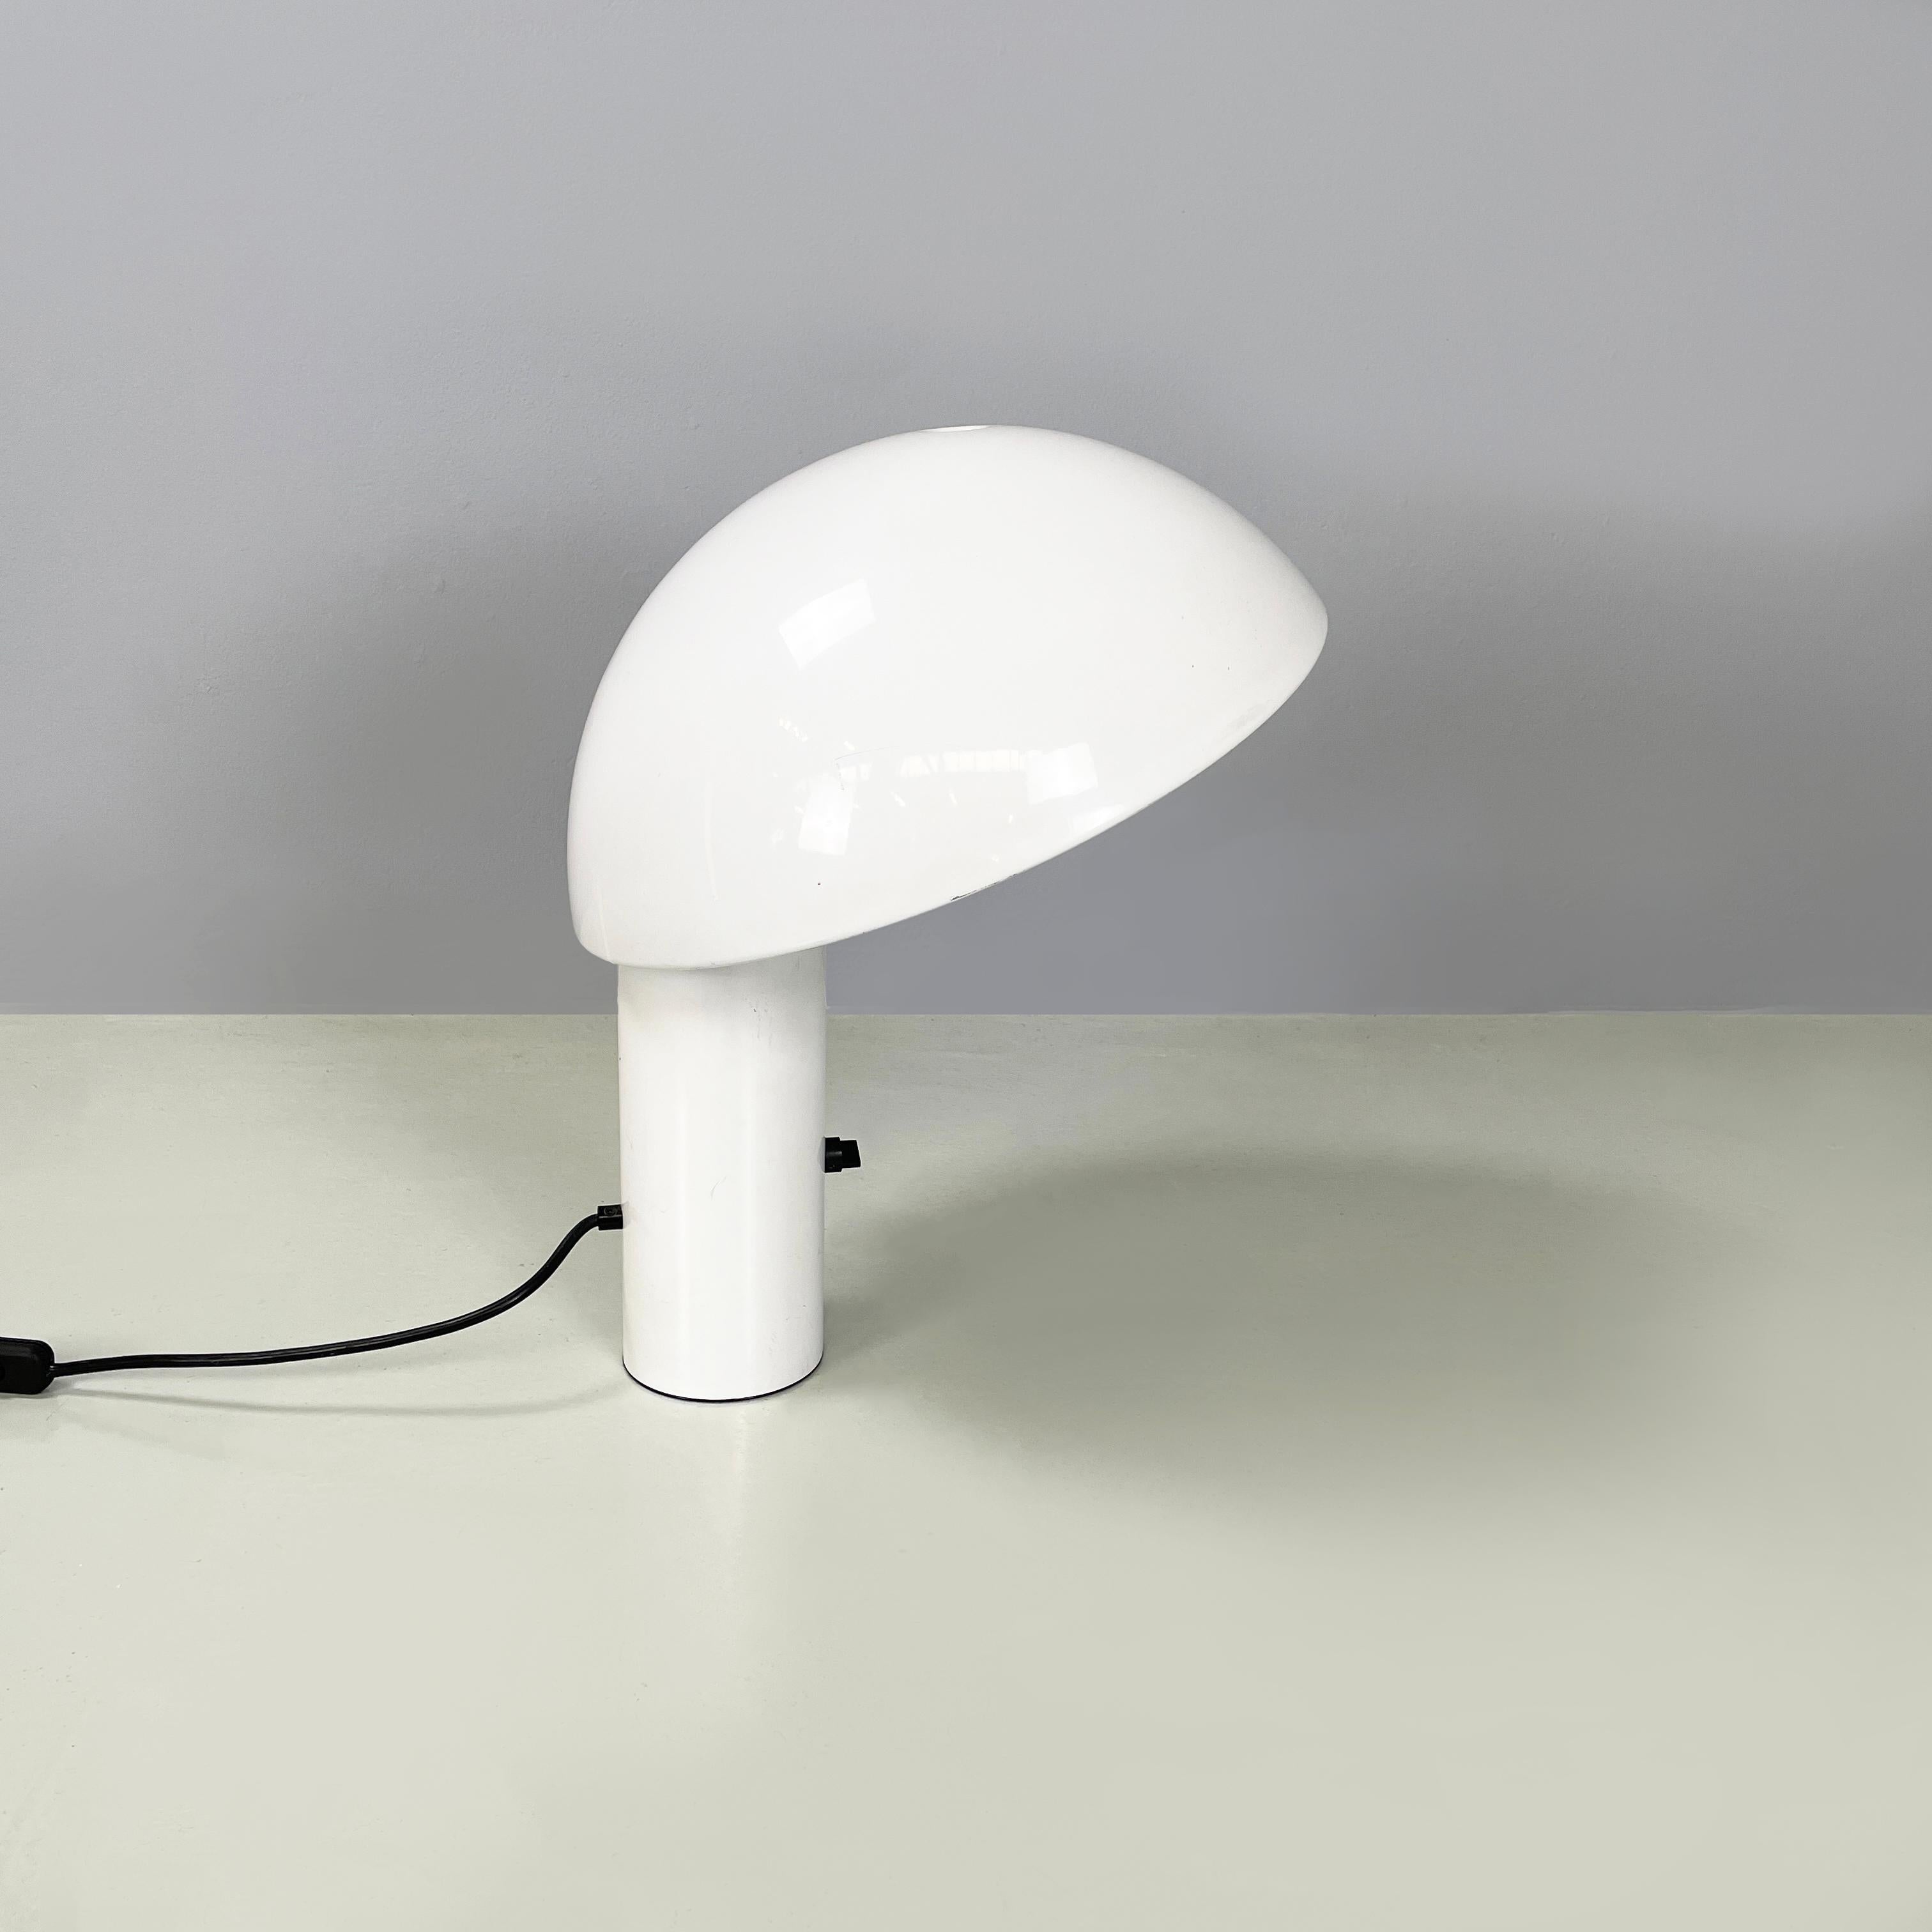 Italian mid-century modern Wall lamp in white ceramic with 4 lights, 1960s
Table lamp mod. Vaga entirely in white painted metal. The inclined dome diffuser has a hole in the upper part, in fact the light diffuses from below and above. On the